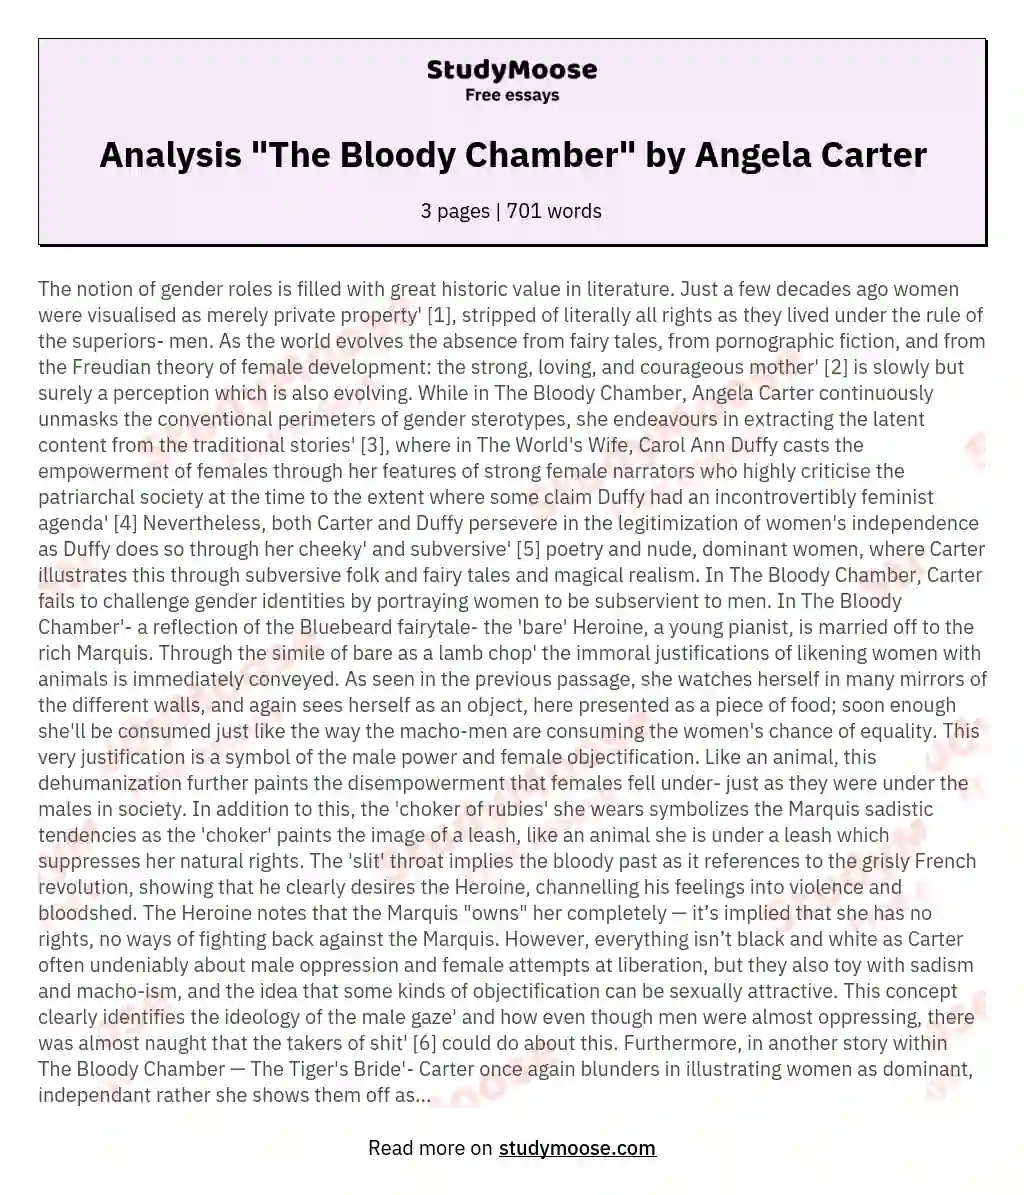 Analysis "The Bloody Chamber" by Angela Carter essay